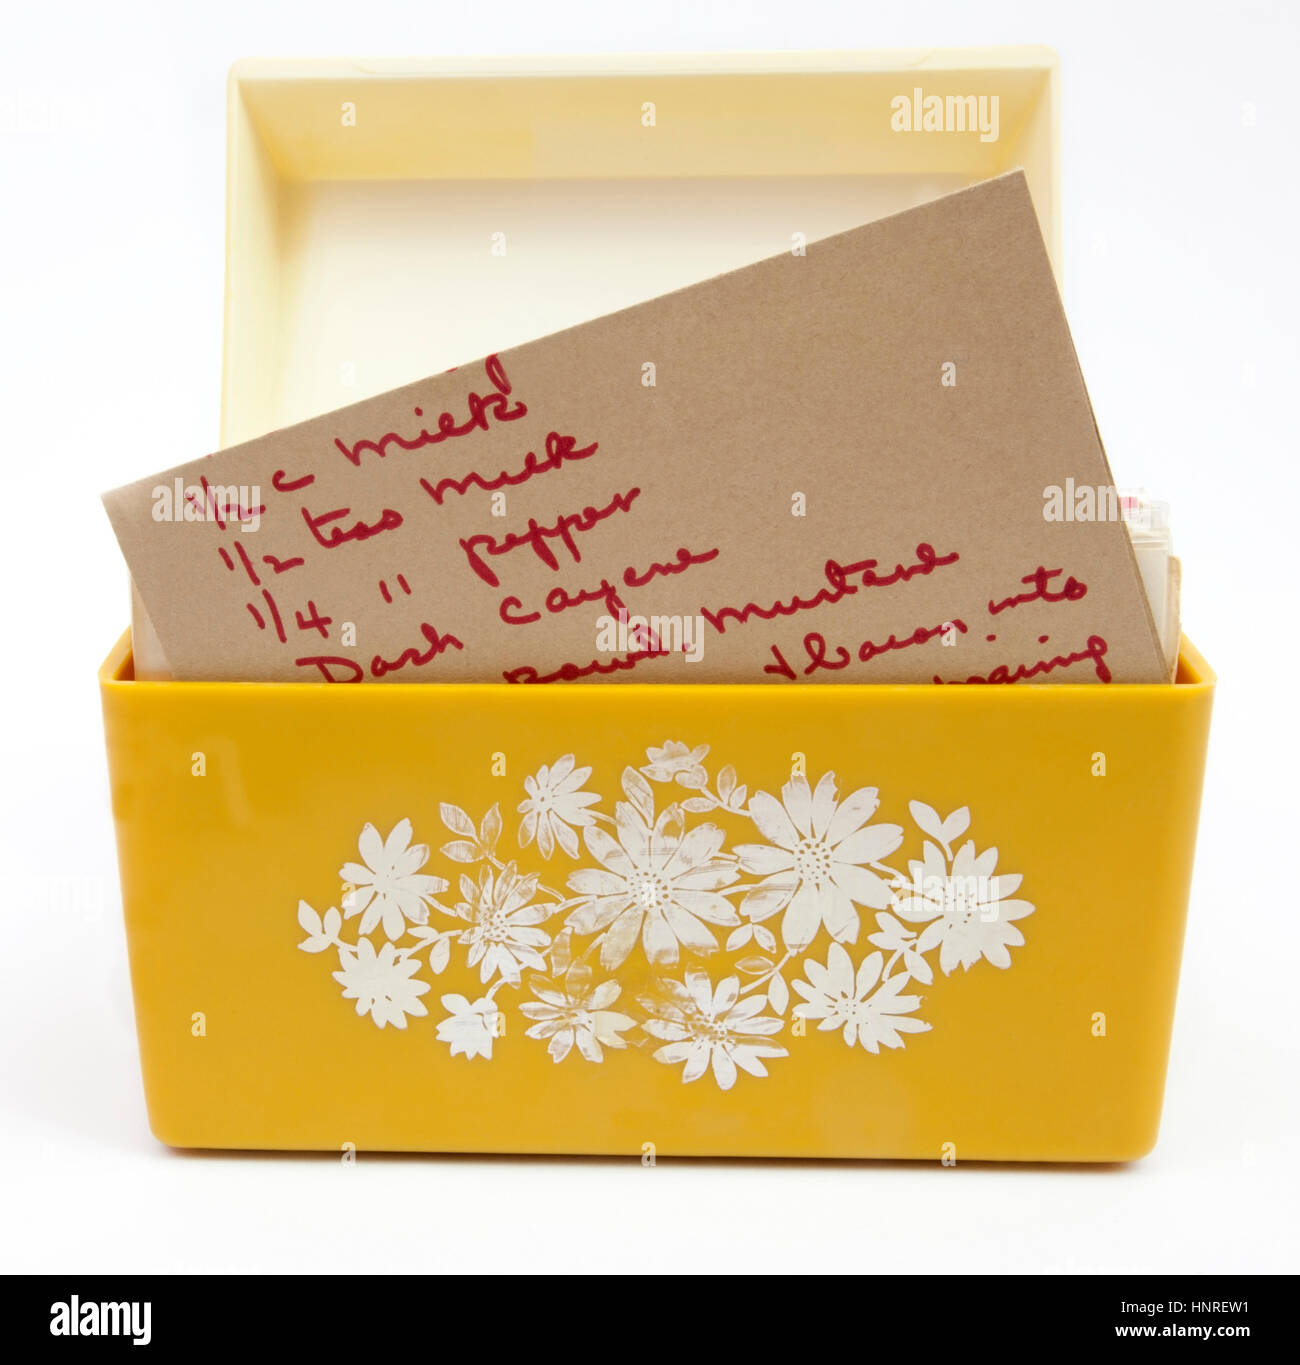 Faded open yellow seventies recipe box with handwritten recipe partially showing. Stock Photo